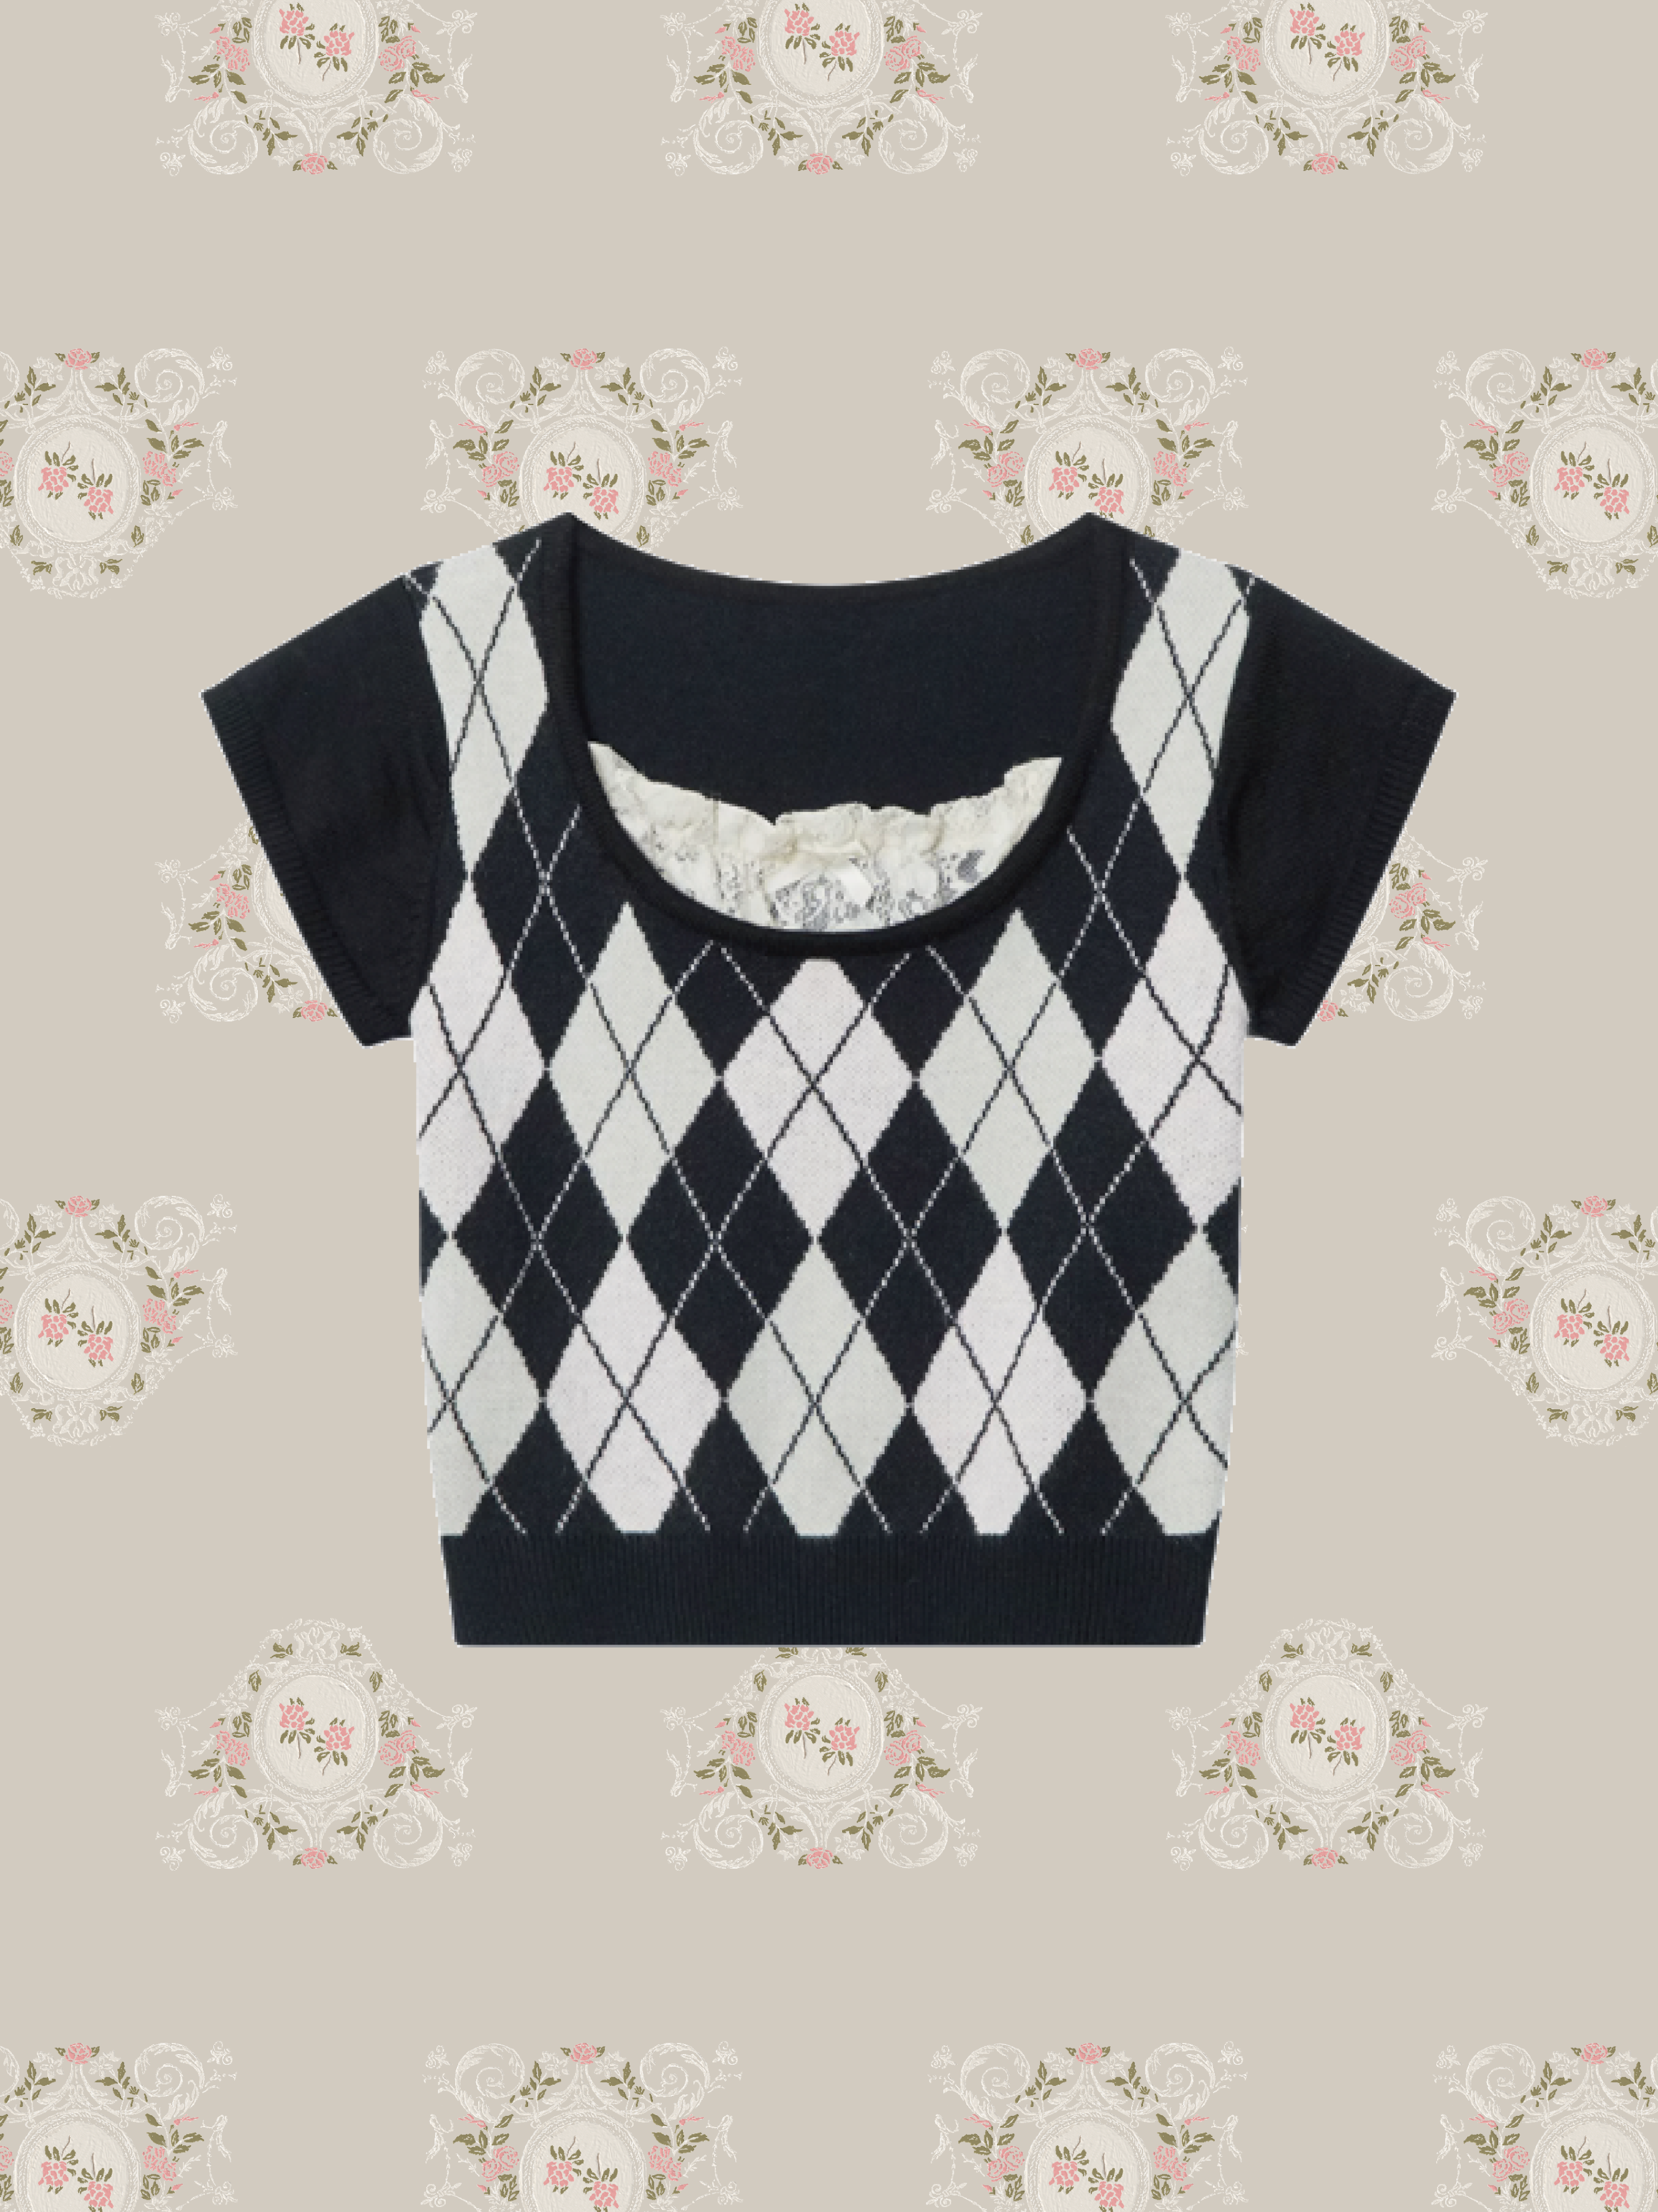 Lace Stiched Argyle Top/レースステッチアーガイルトップス